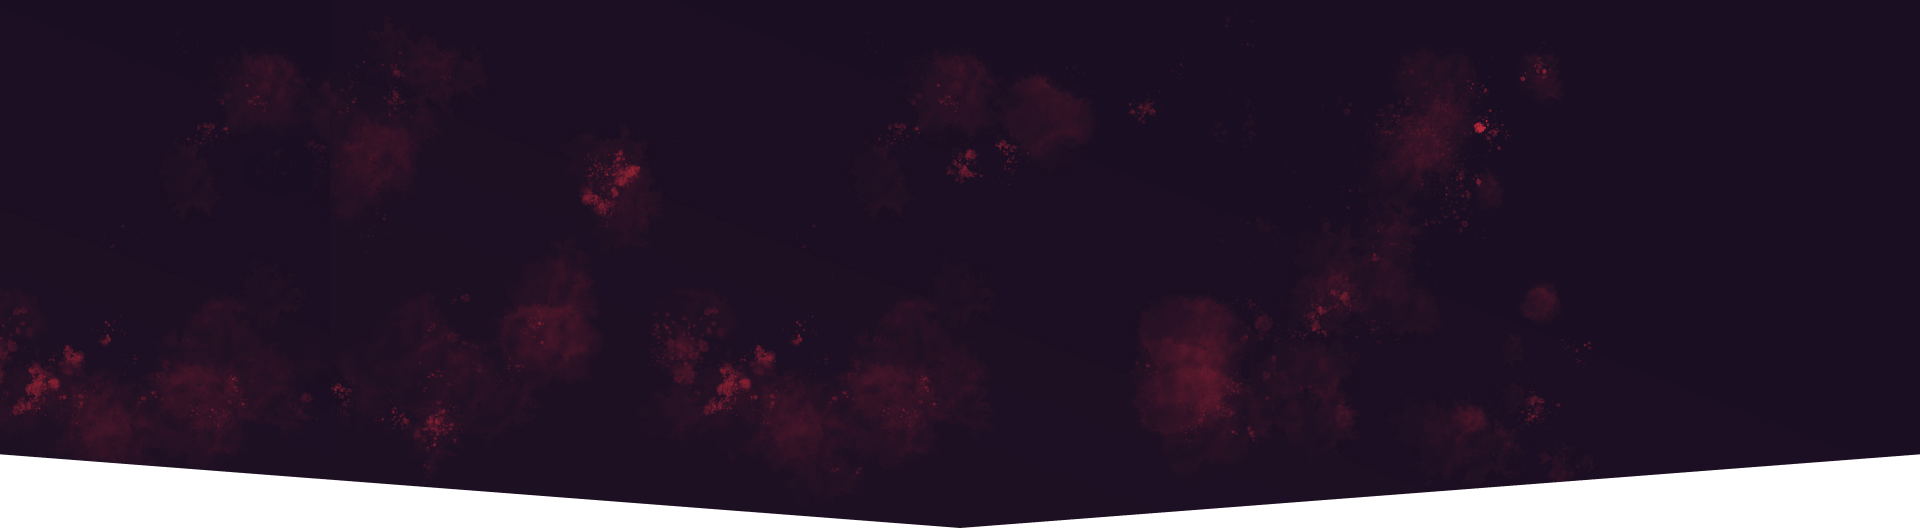 Background image of abstract blood splatter with a dark red color scheme.